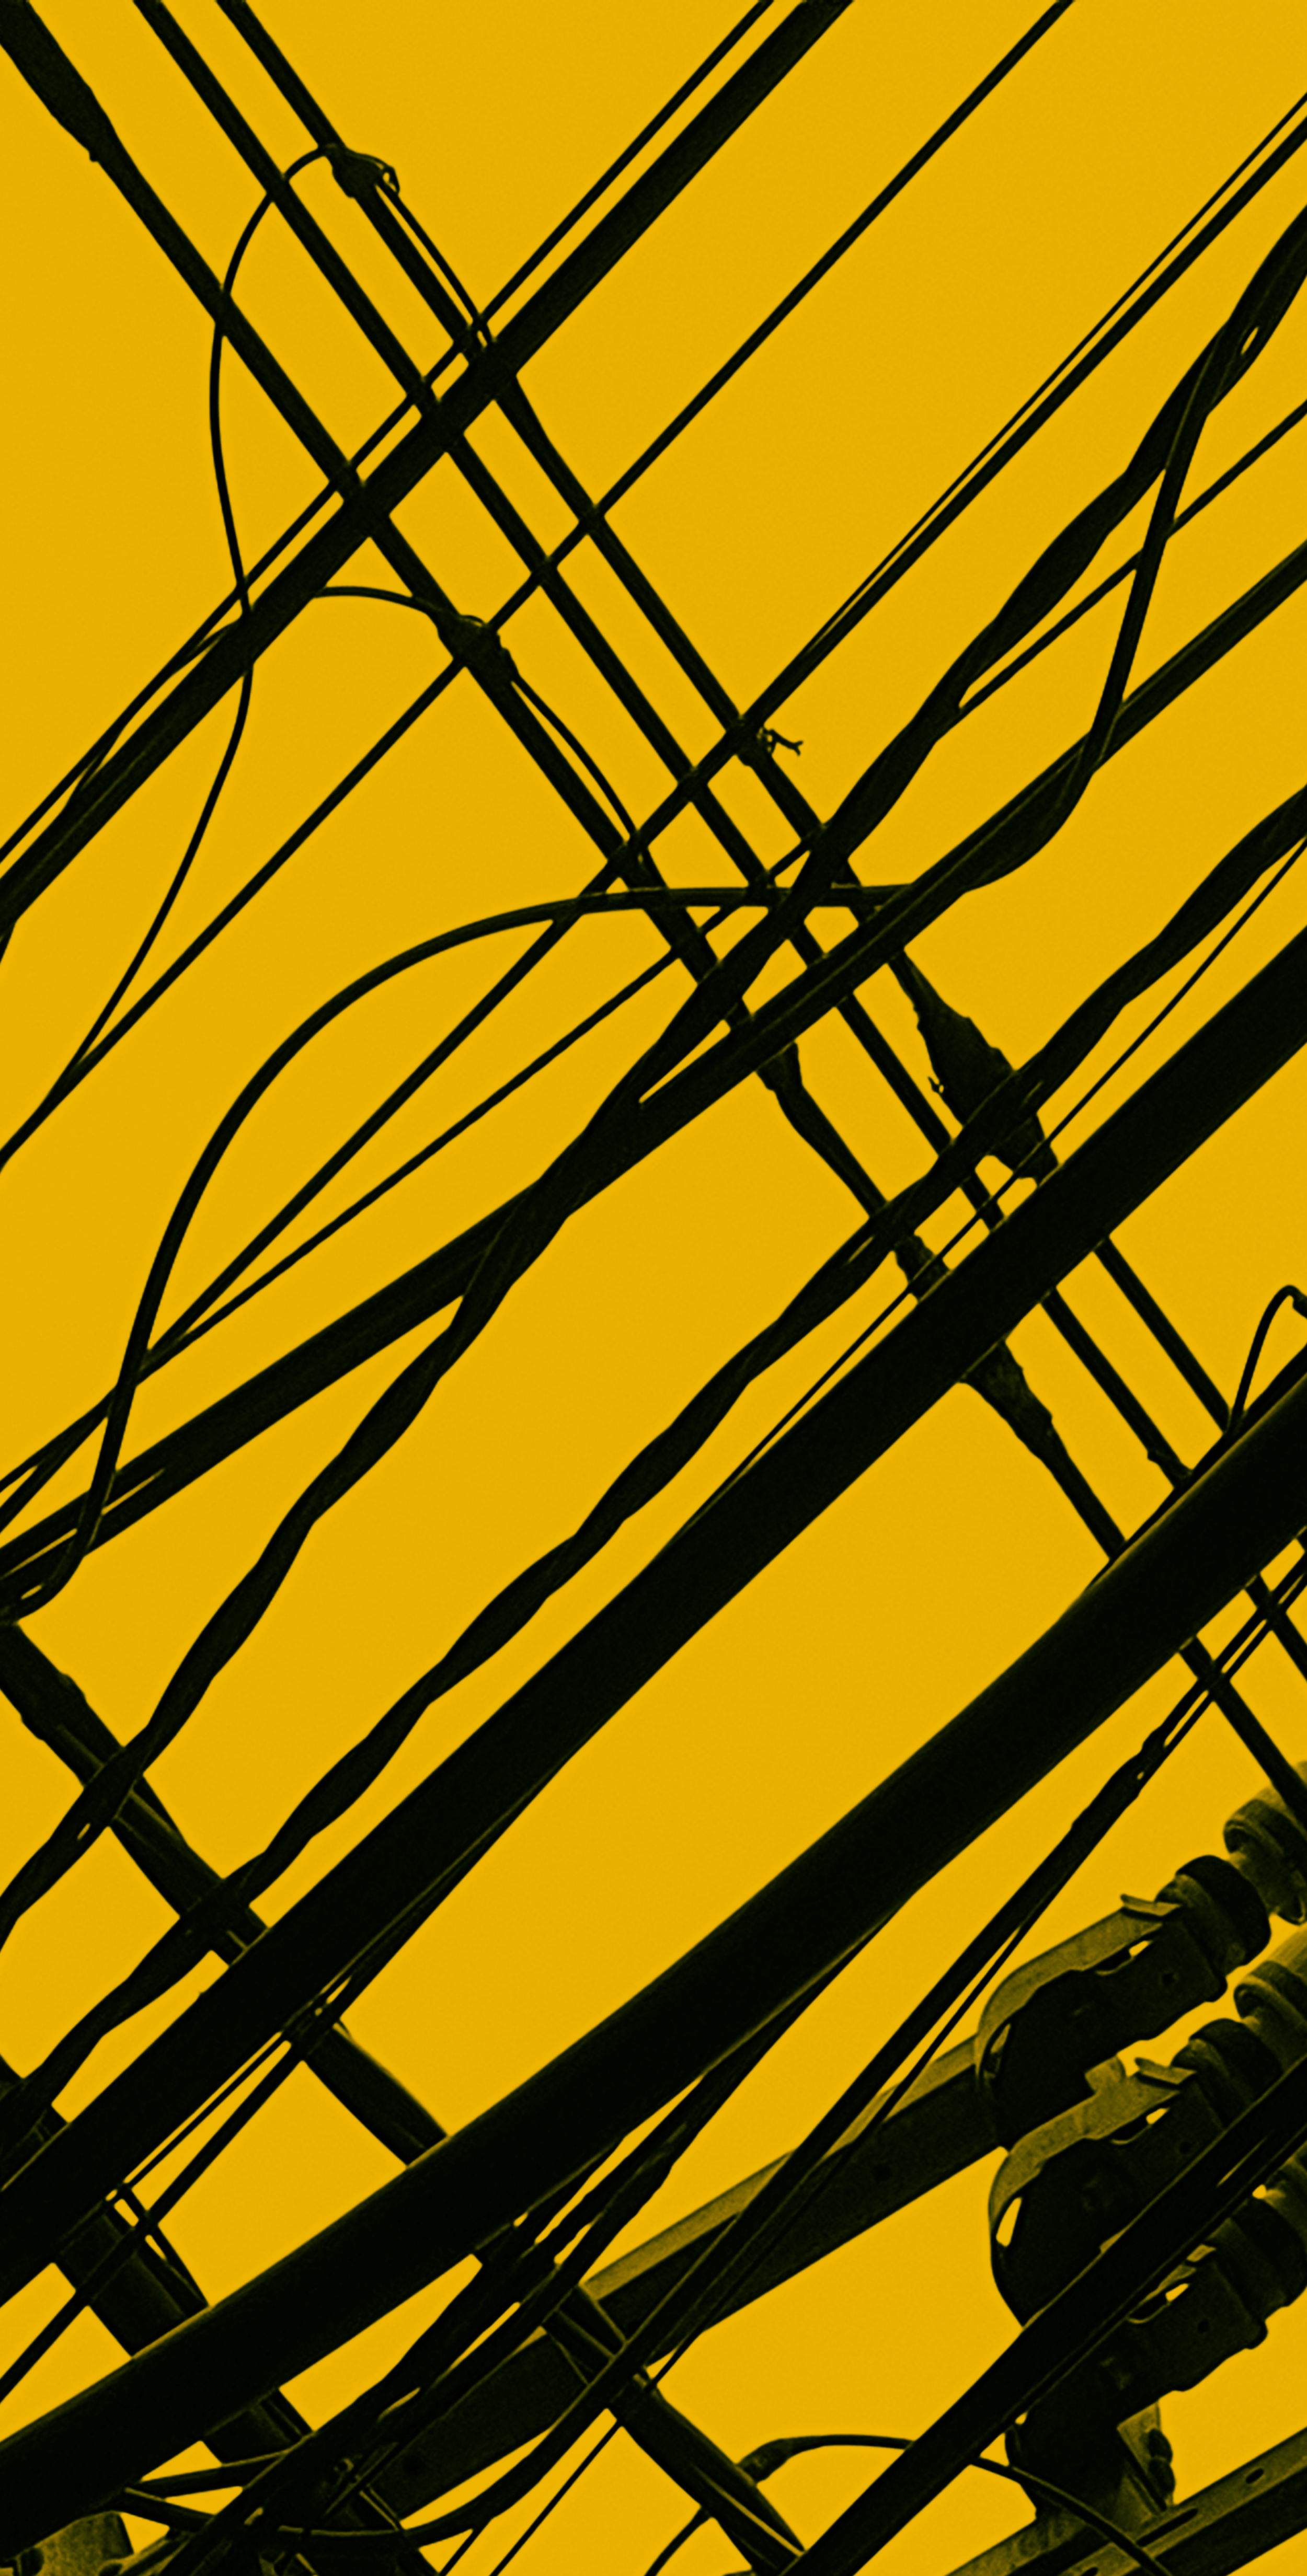 WIRES_0004_Group-5.png